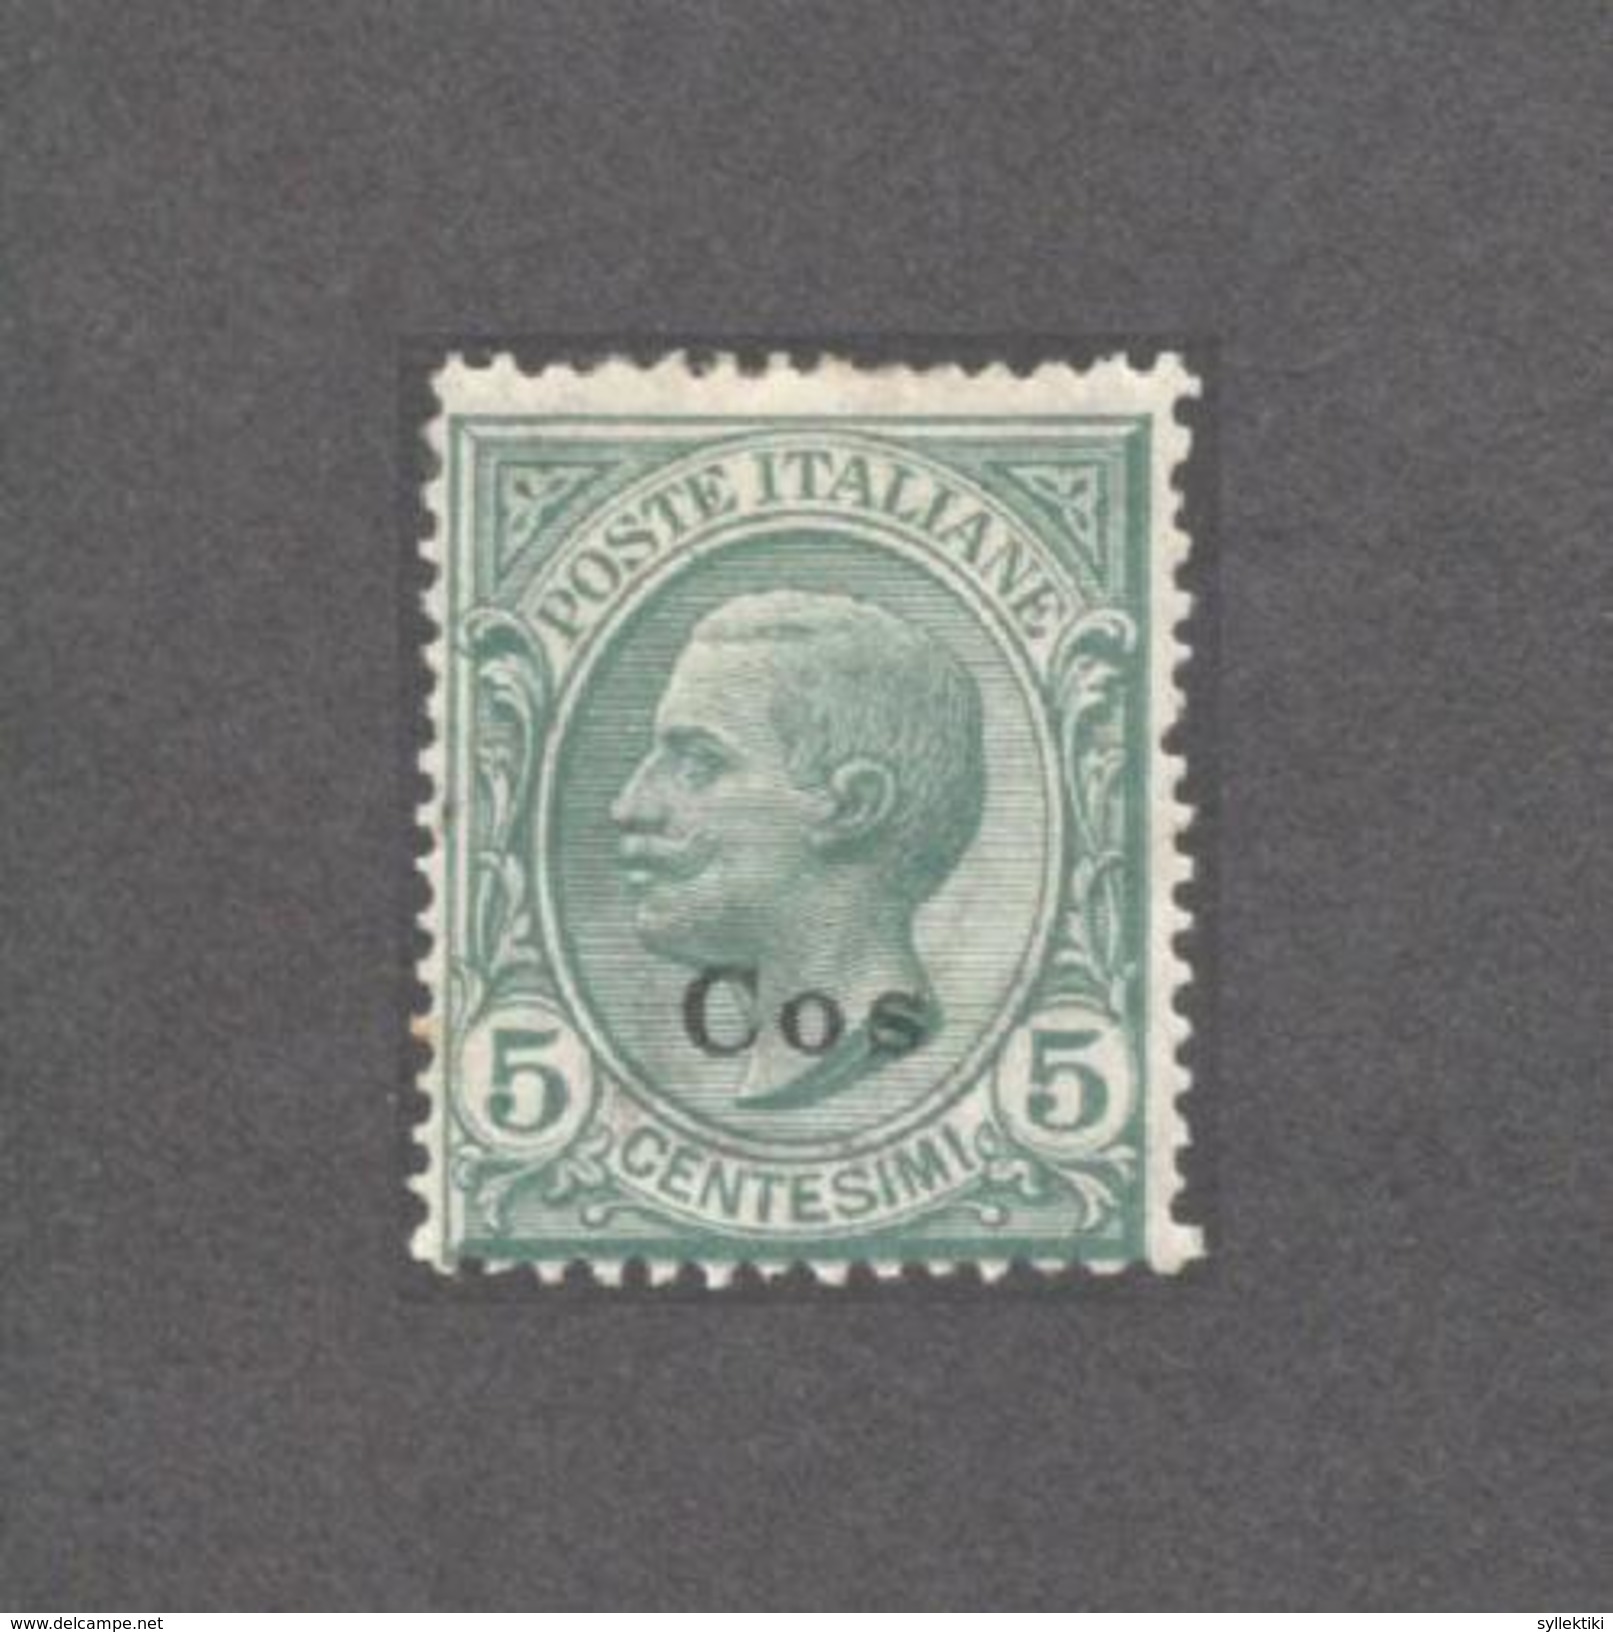 GREECE 1912 COS OVERPRINT ON ITALIAN STAMP 5cents MH - Ohne Zuordnung